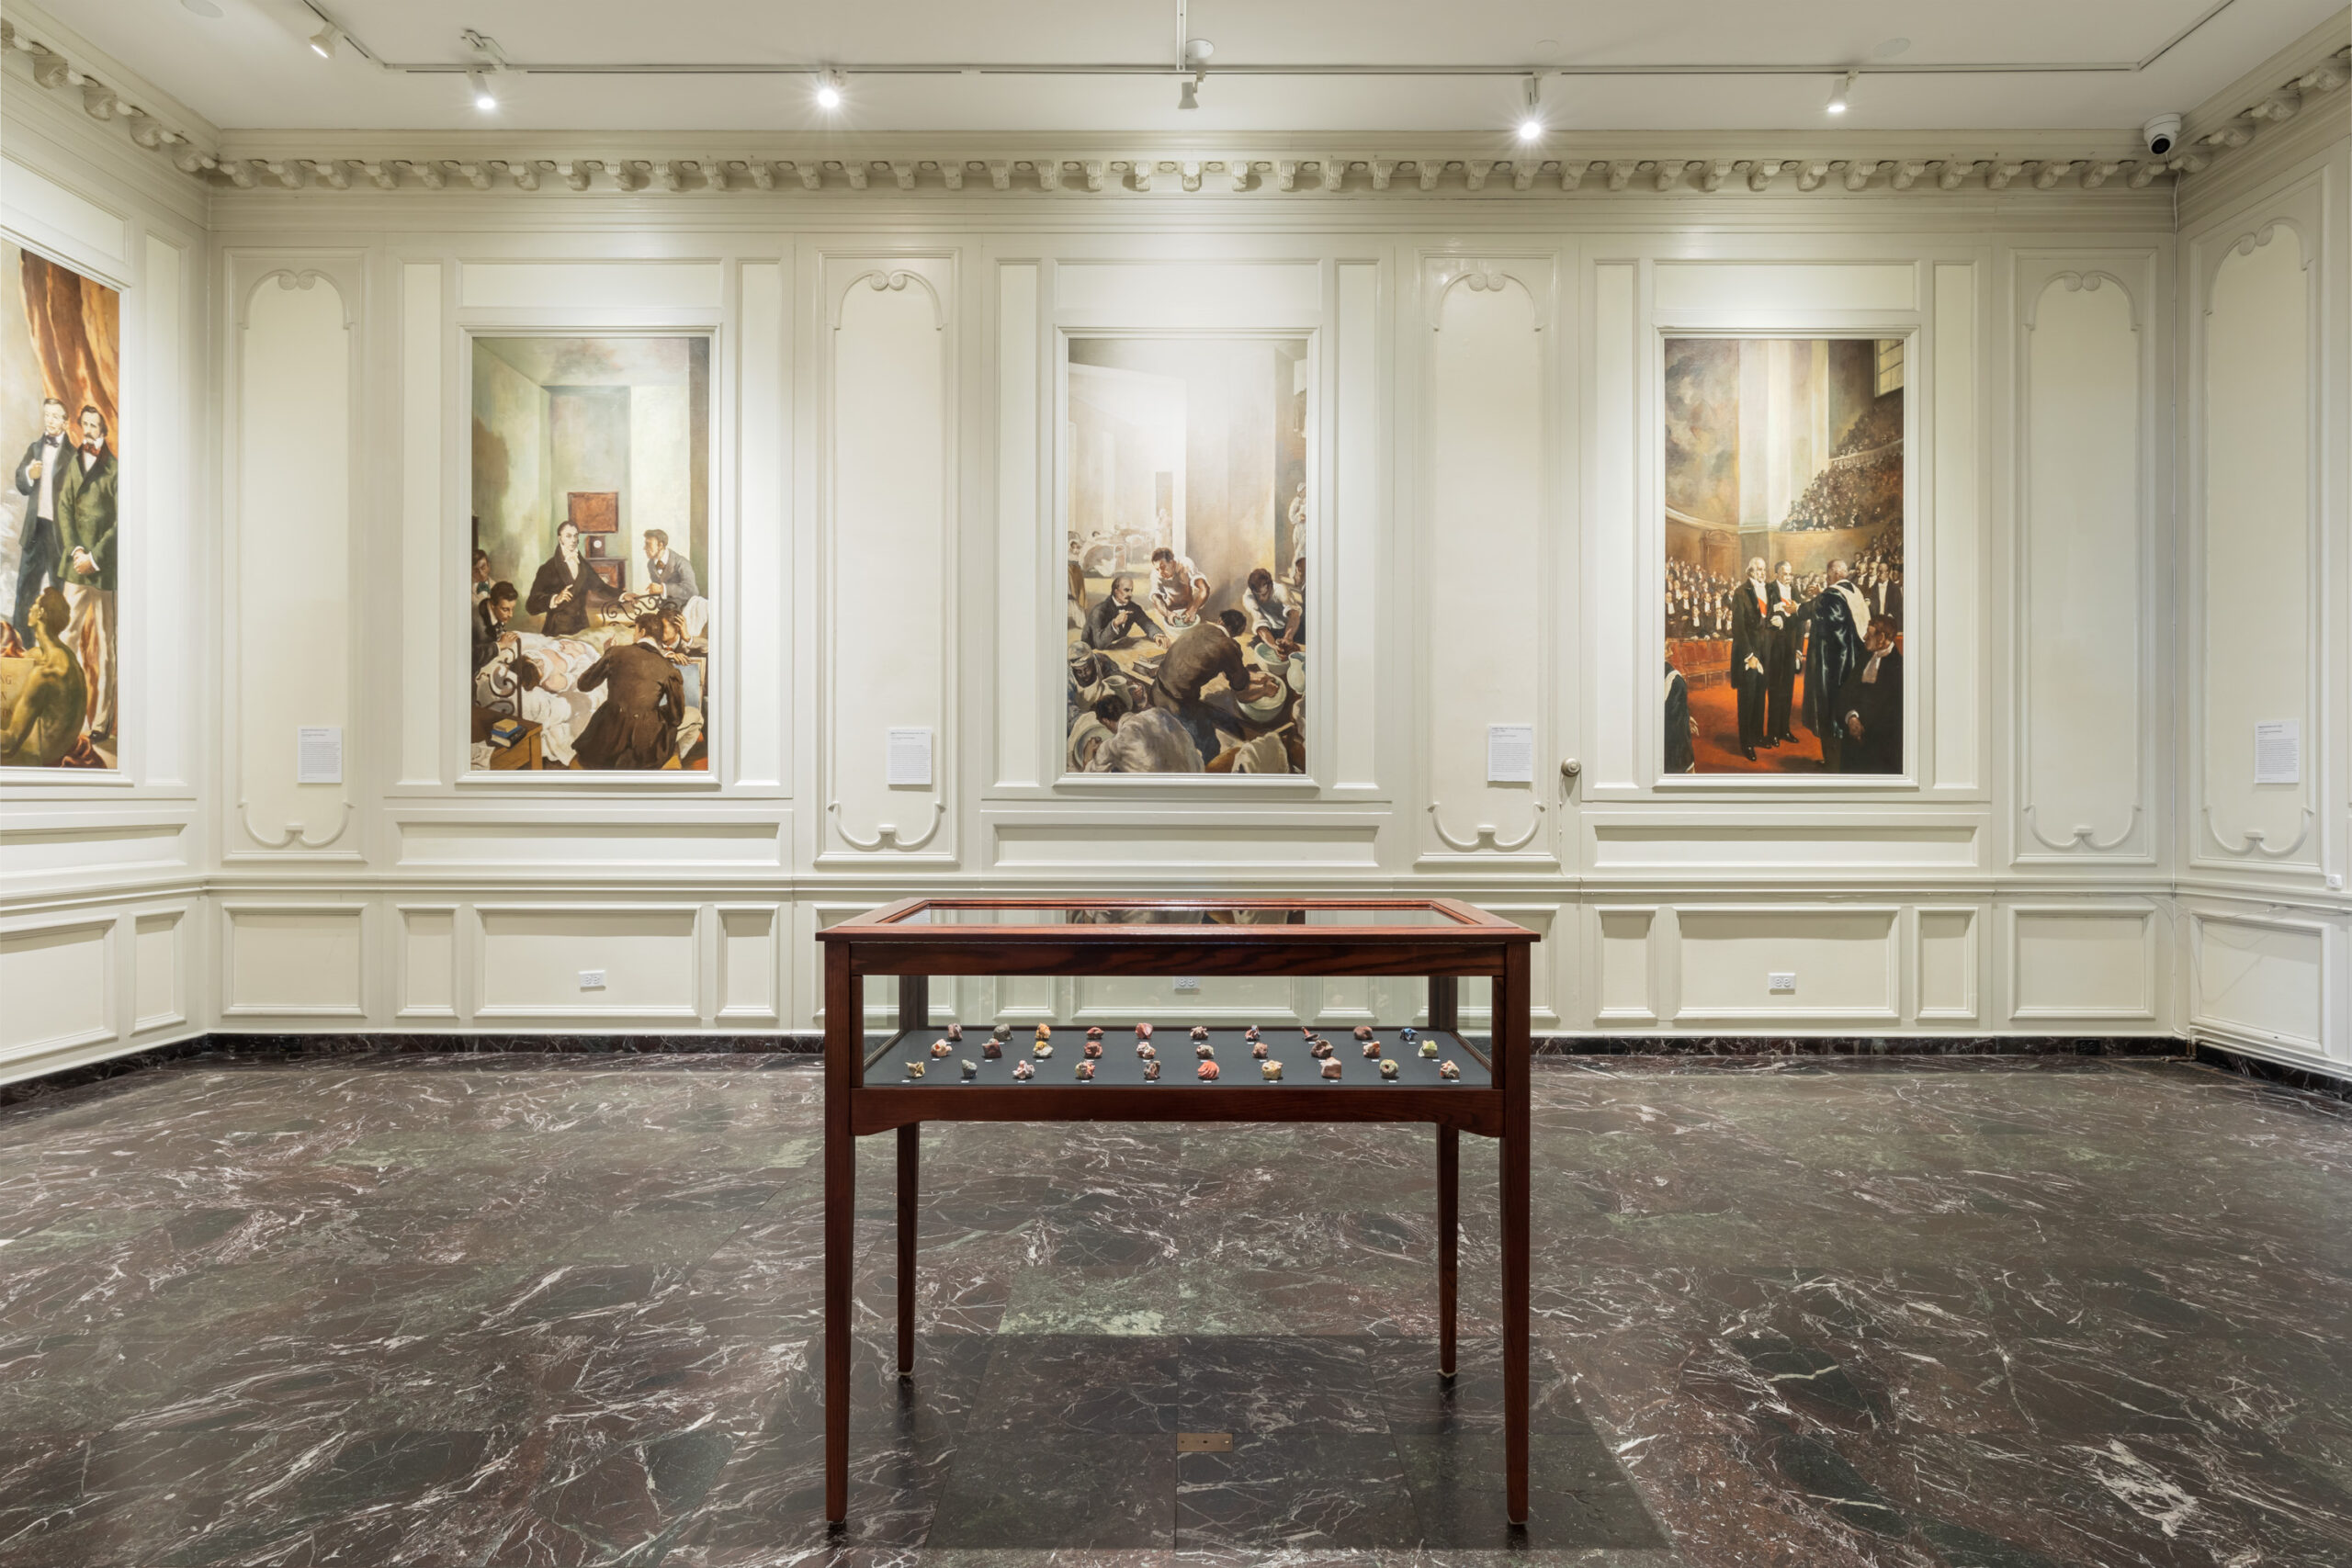 a medium-wide angle photo in a large off-white room with ornate molding and 4 visible vertically-oriented murals displaying different scenes from medical history like autopsies, deliveries, and academies. A sleek wooden display case with clear glass panels rests in the center of the grand room atop a black, white and green marble stone floor. Inside the display case rests 30 small 3d-printed candies in a variety of colors.